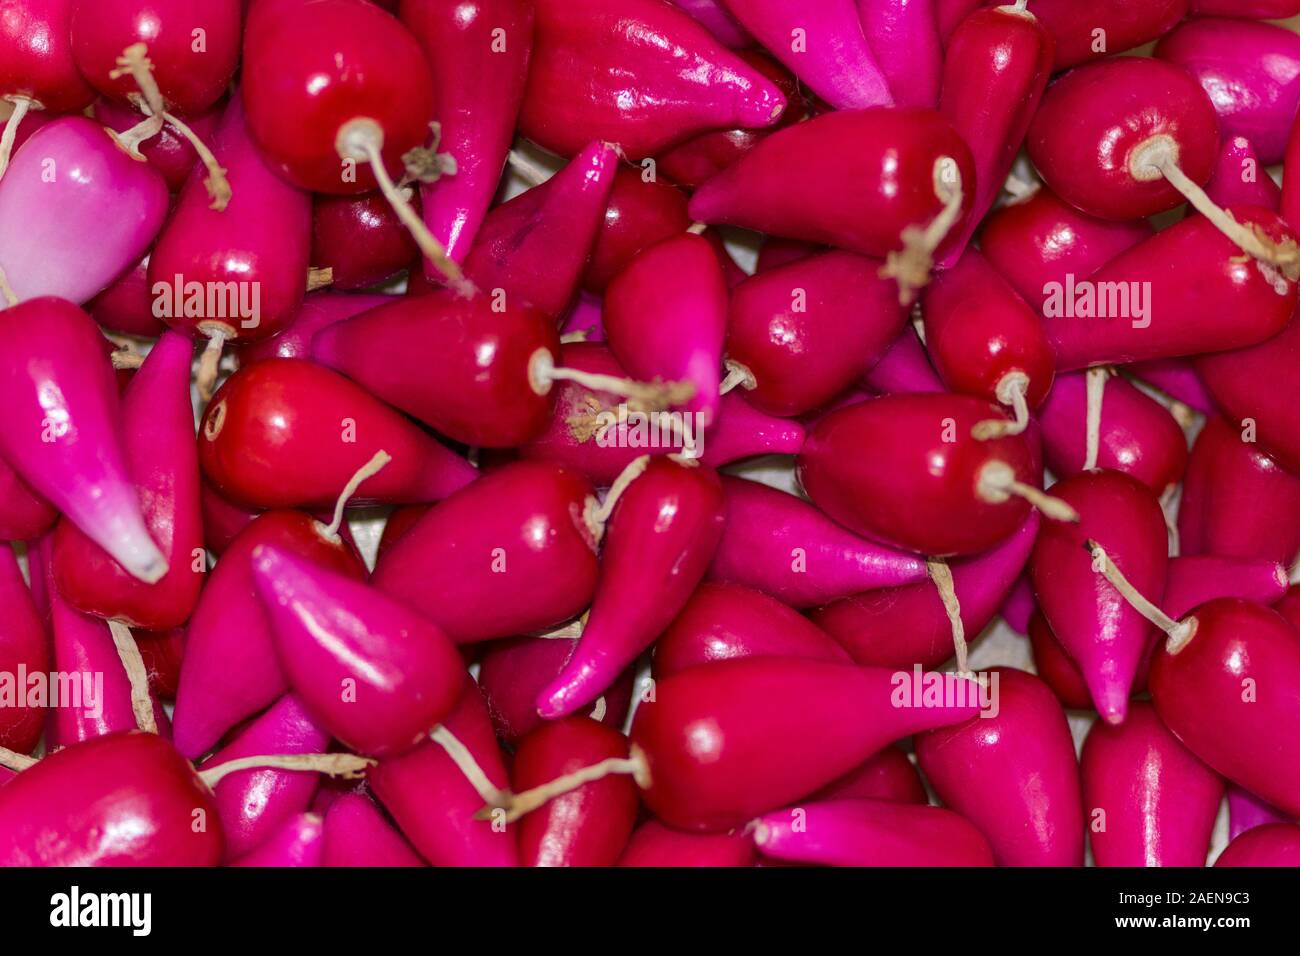 Pitiguey group fresh pink tropical fruit in marketplace Stock Photo